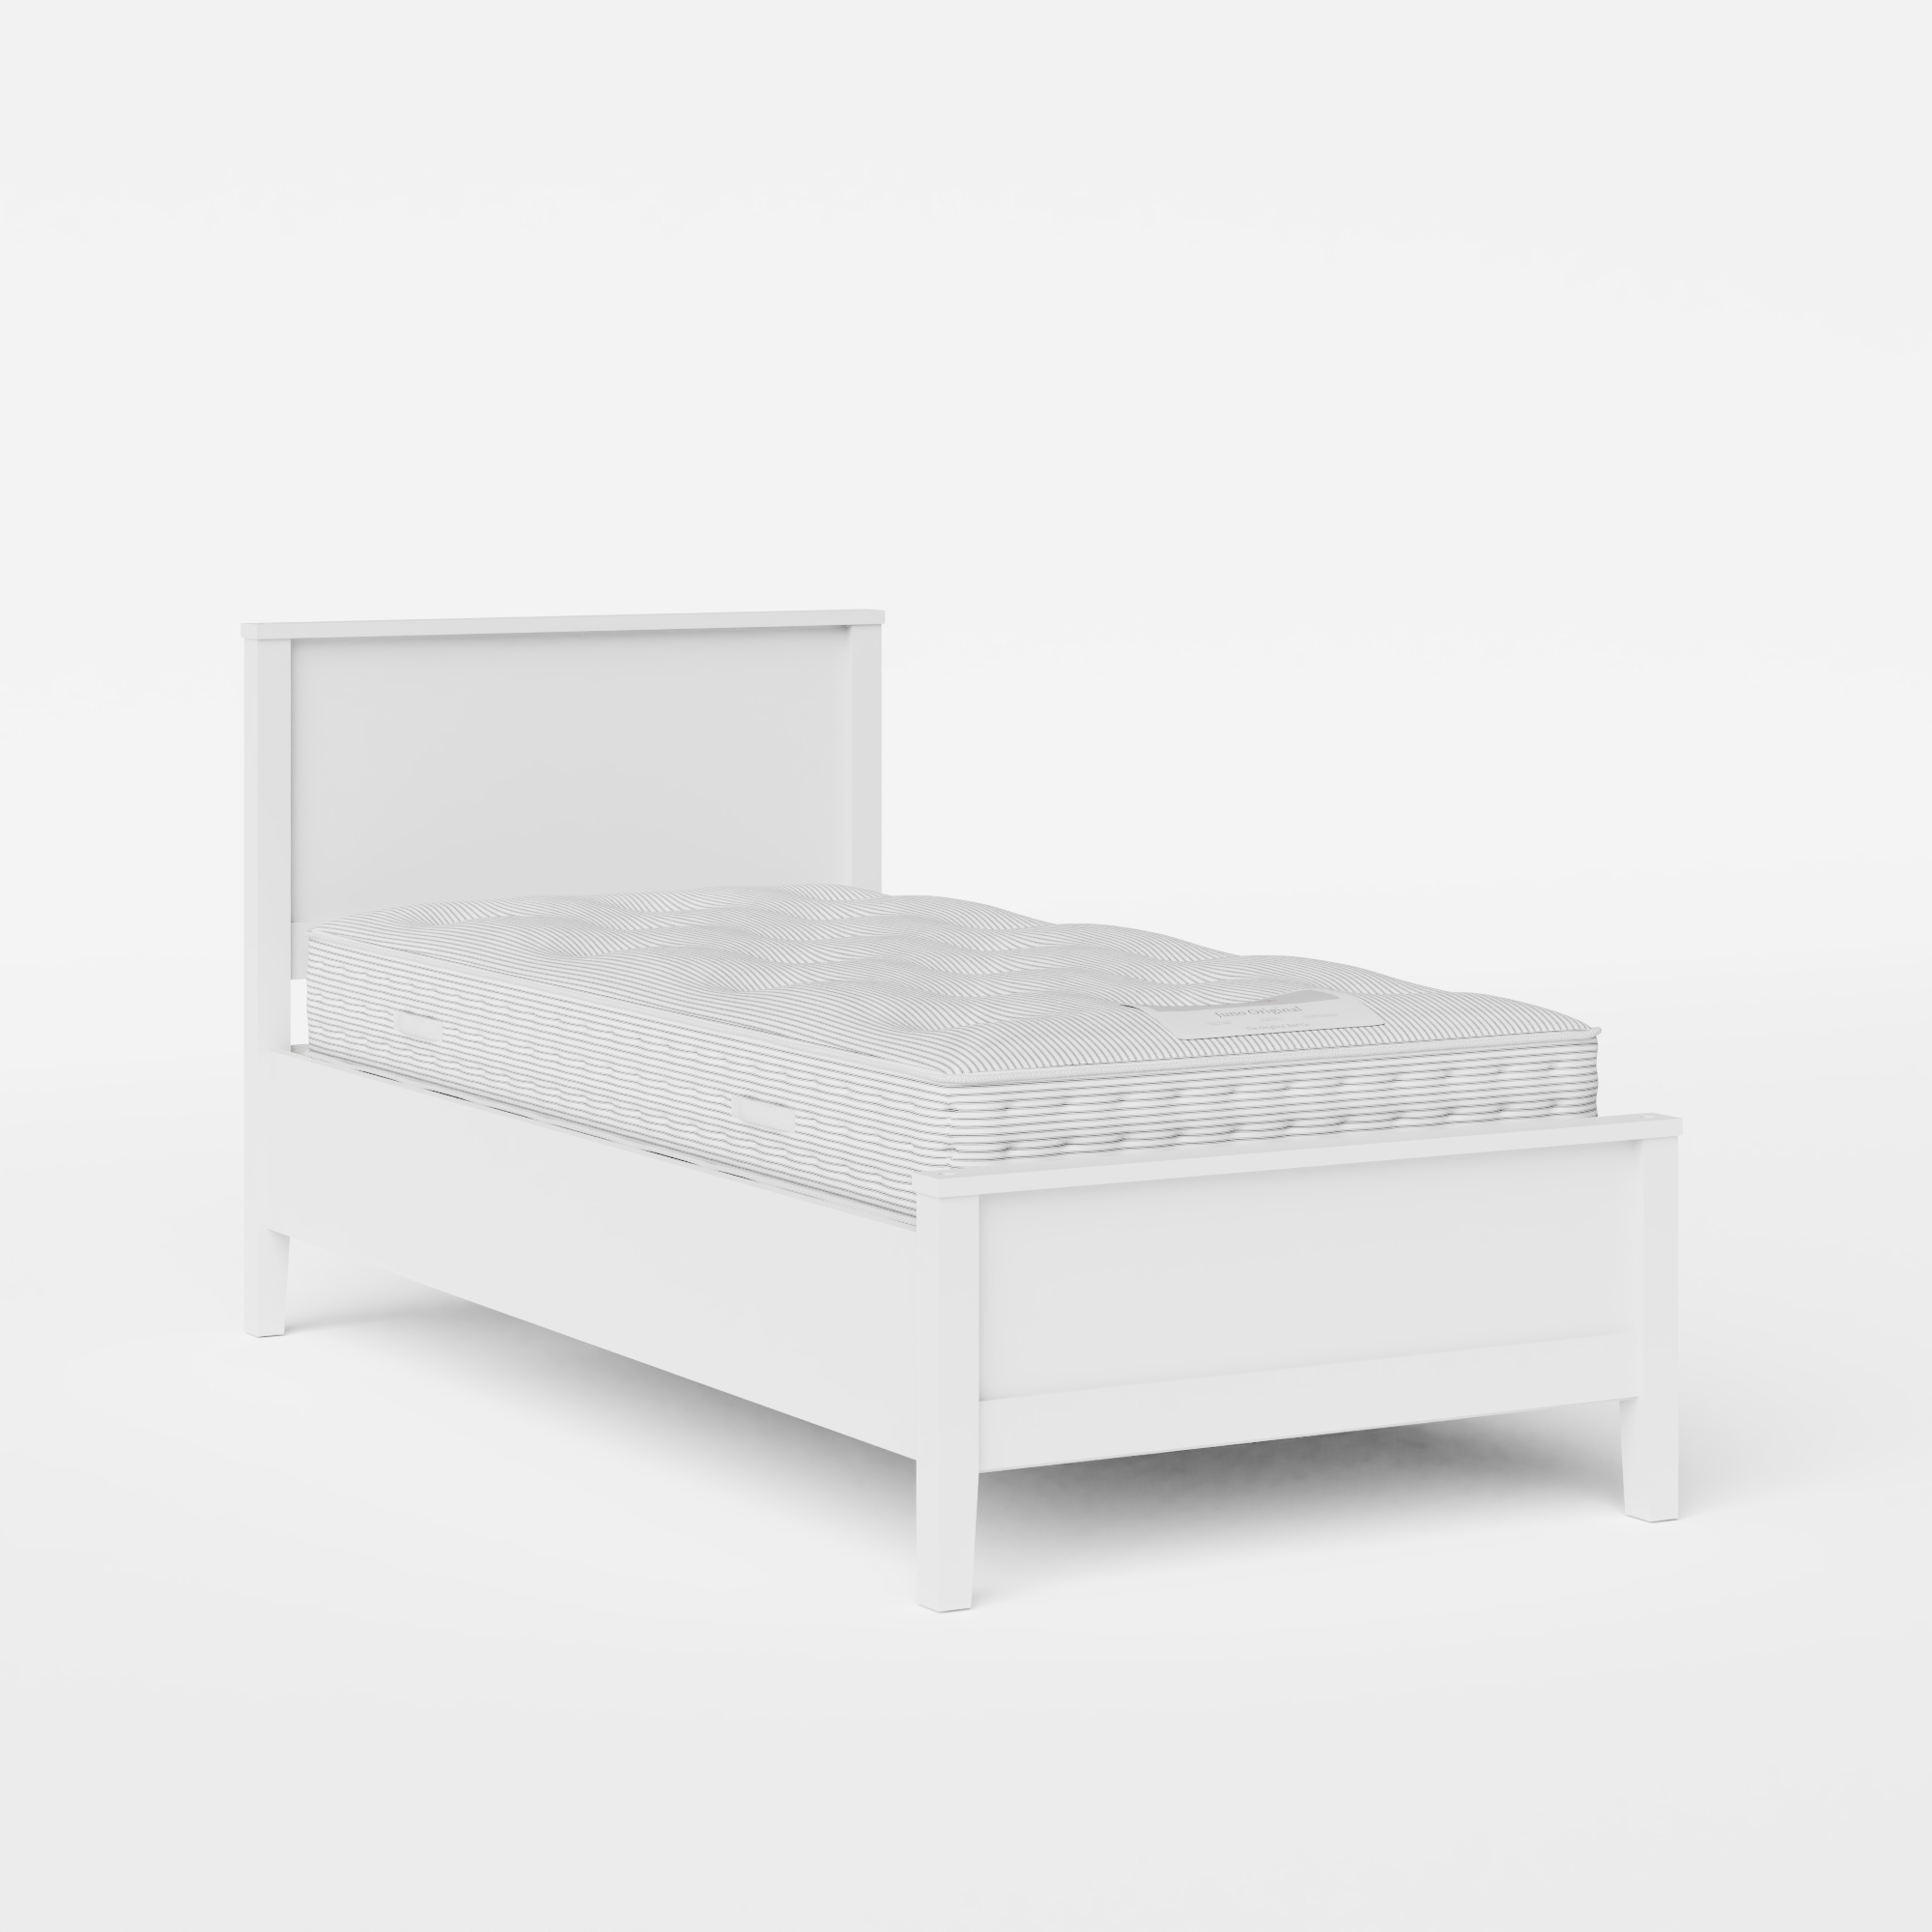 Ramsay Painted single painted wood bed in white with Juno mattress